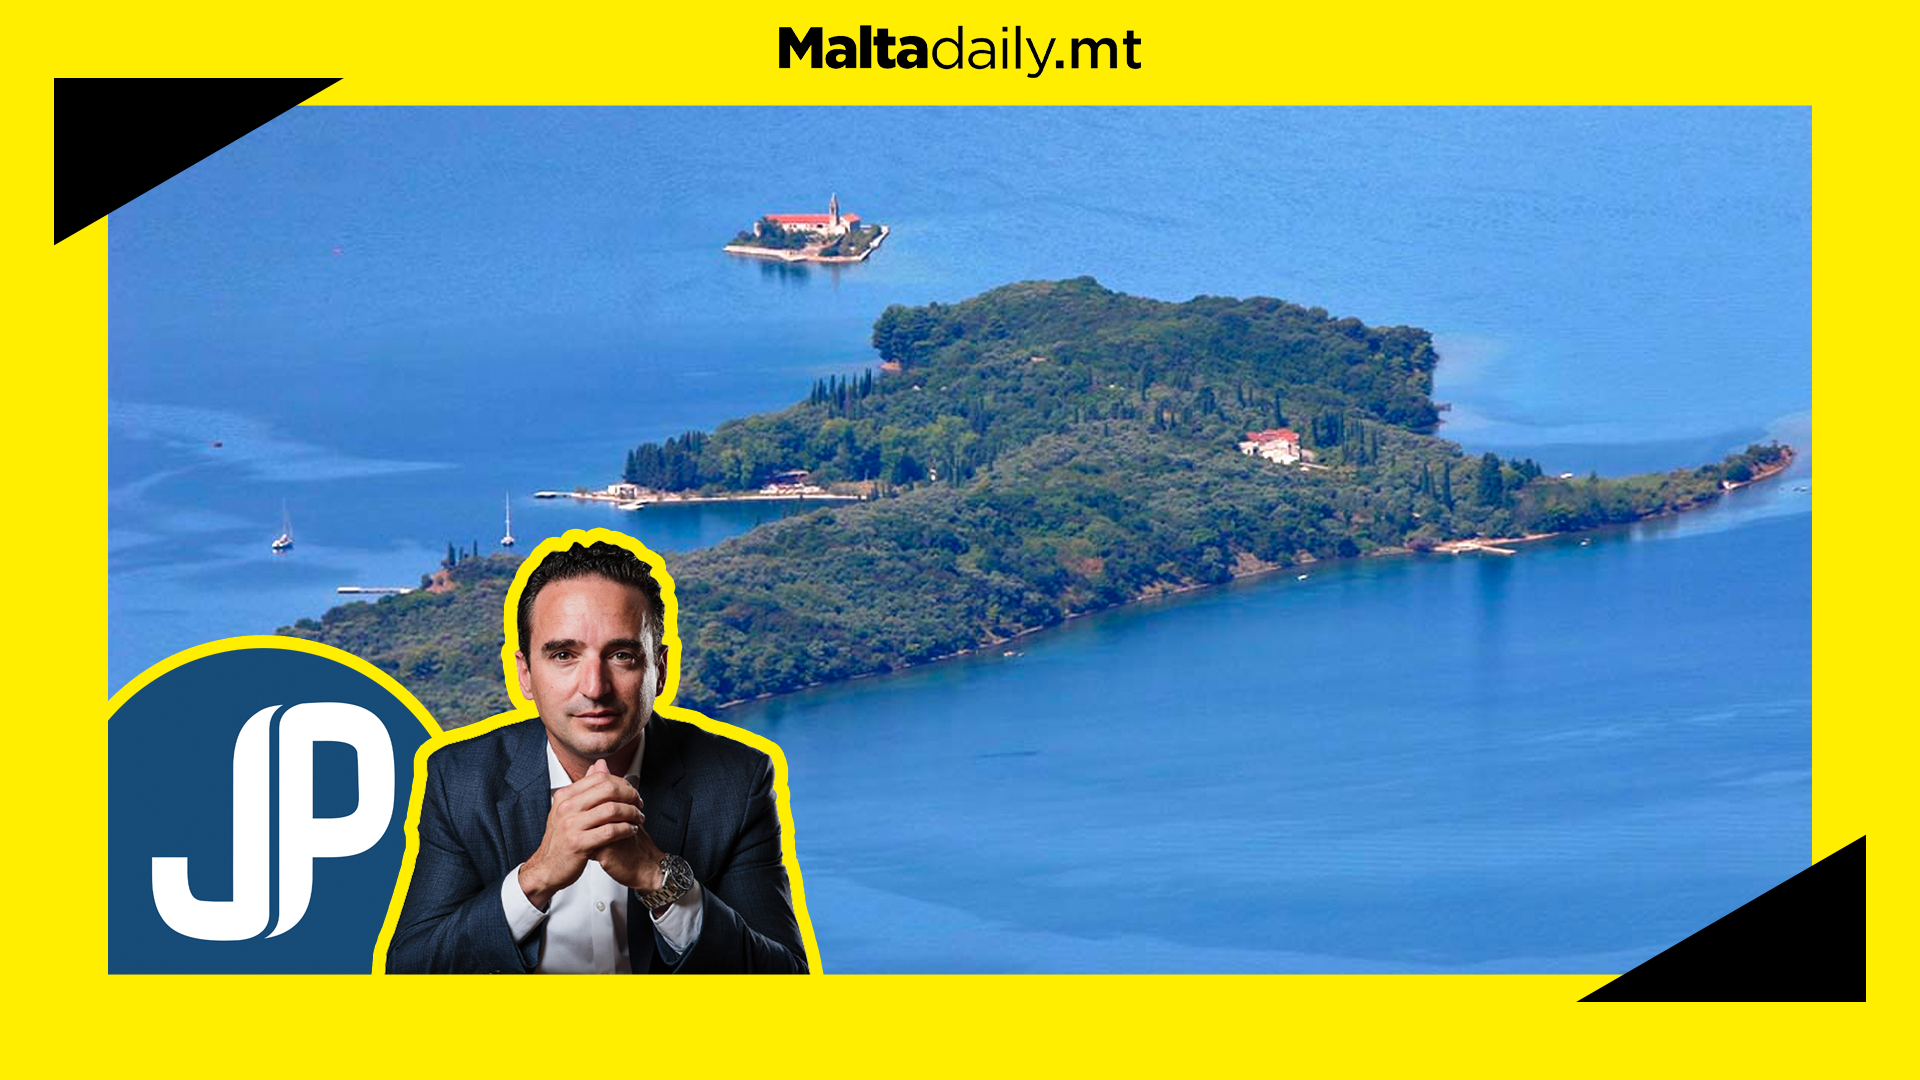 J.Portelli Projects reportedly buys an Island in Montenegro for around 100 million